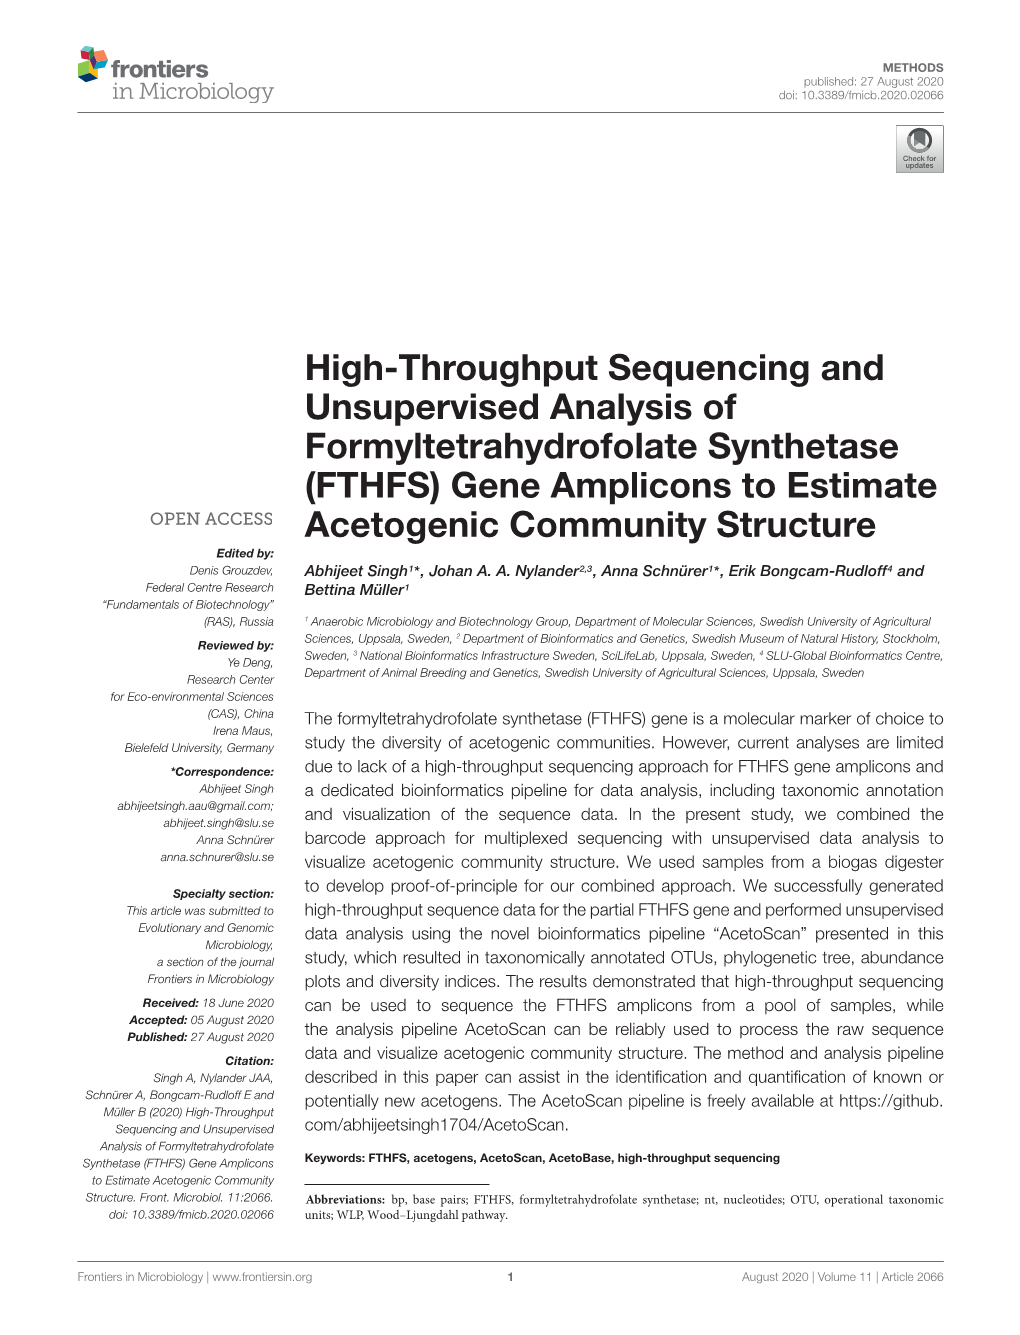 High-Throughput Sequencing and Unsupervised Analysis Of